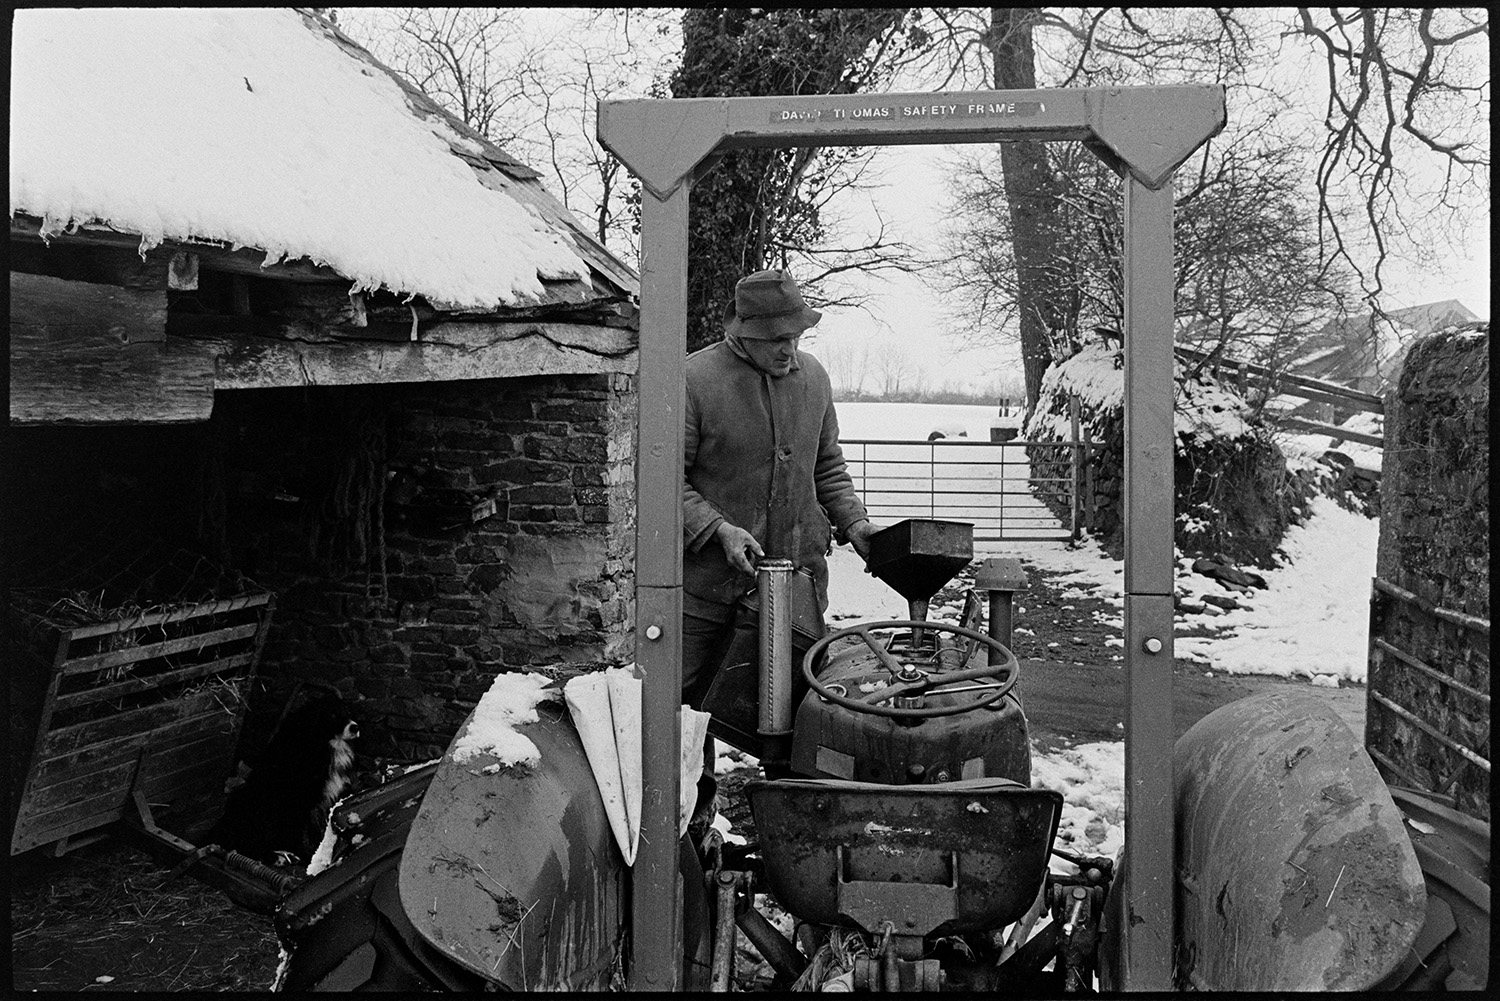 Snow, tractor in farm yard and farmer filling fuel tank with diesel. 
[Alf Pugsley filling his tractor with diesel in the snowy farmyard at Lower Langham, Dolton. A dog is sat in a barn nearby watching him.]